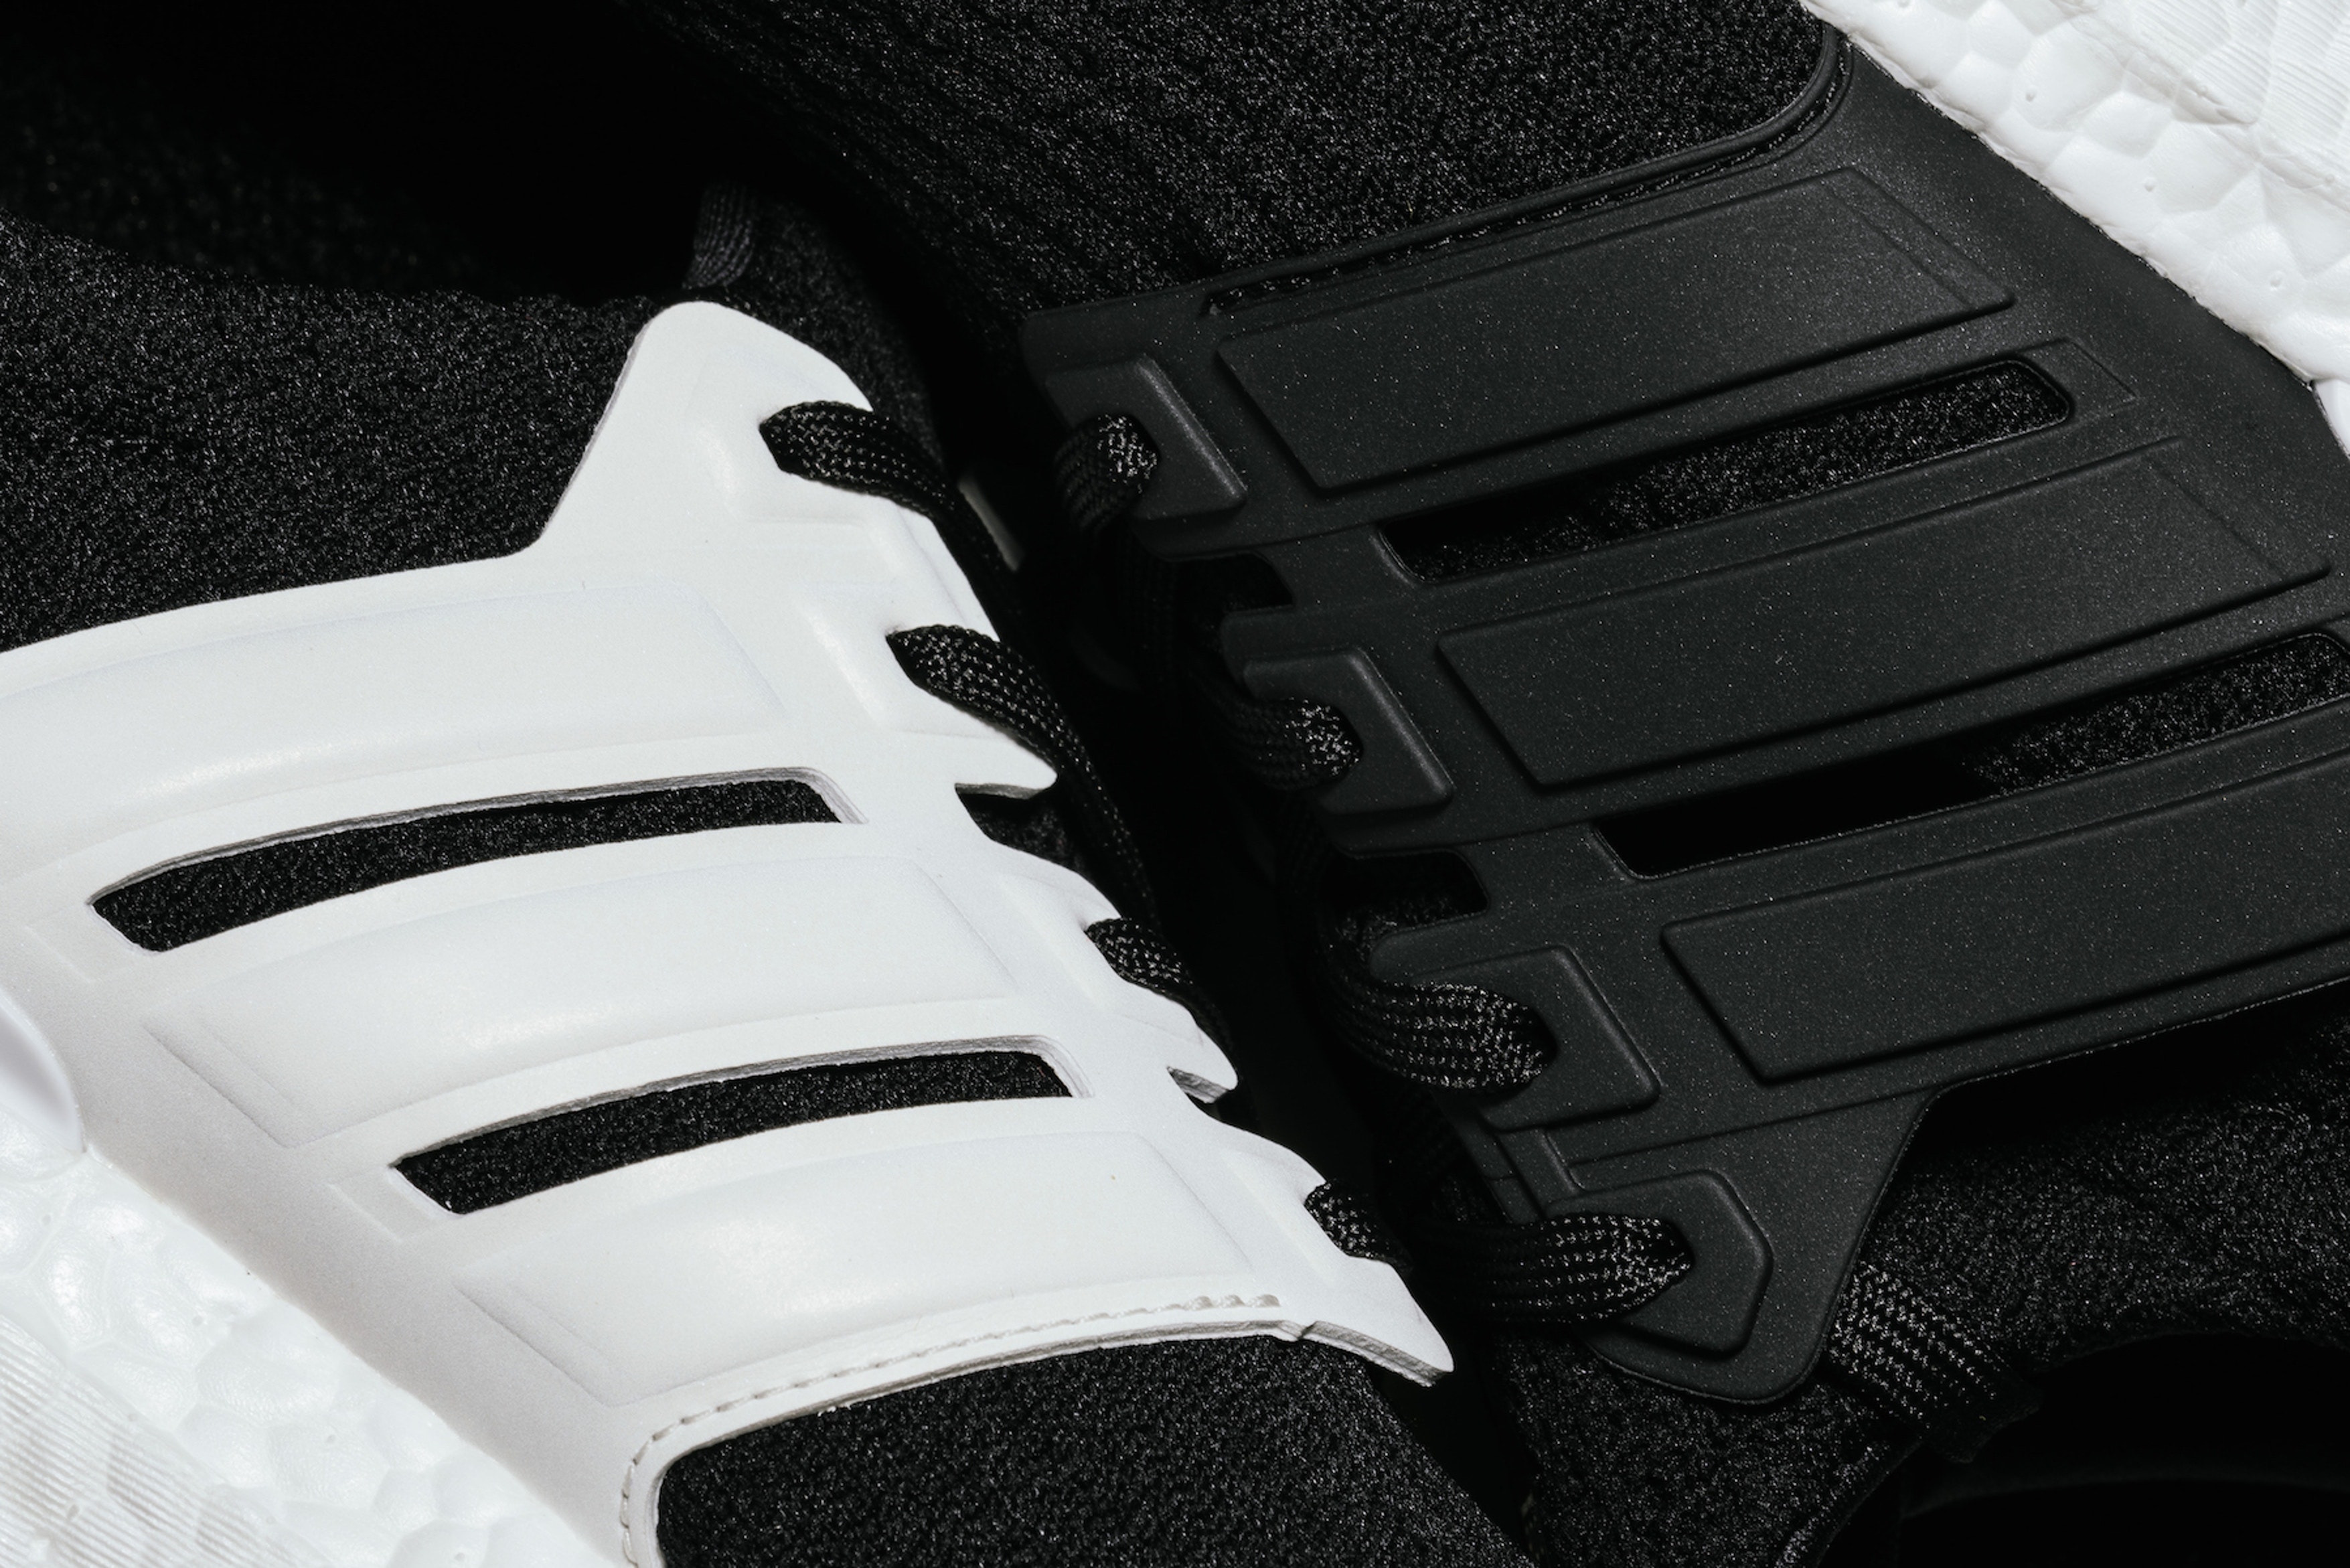 DOE adidas UltraBOOST XENO collaboration black white april may 2018 release date info drop sneakers shoes footwear miadidas 100 pairs limited shanghai